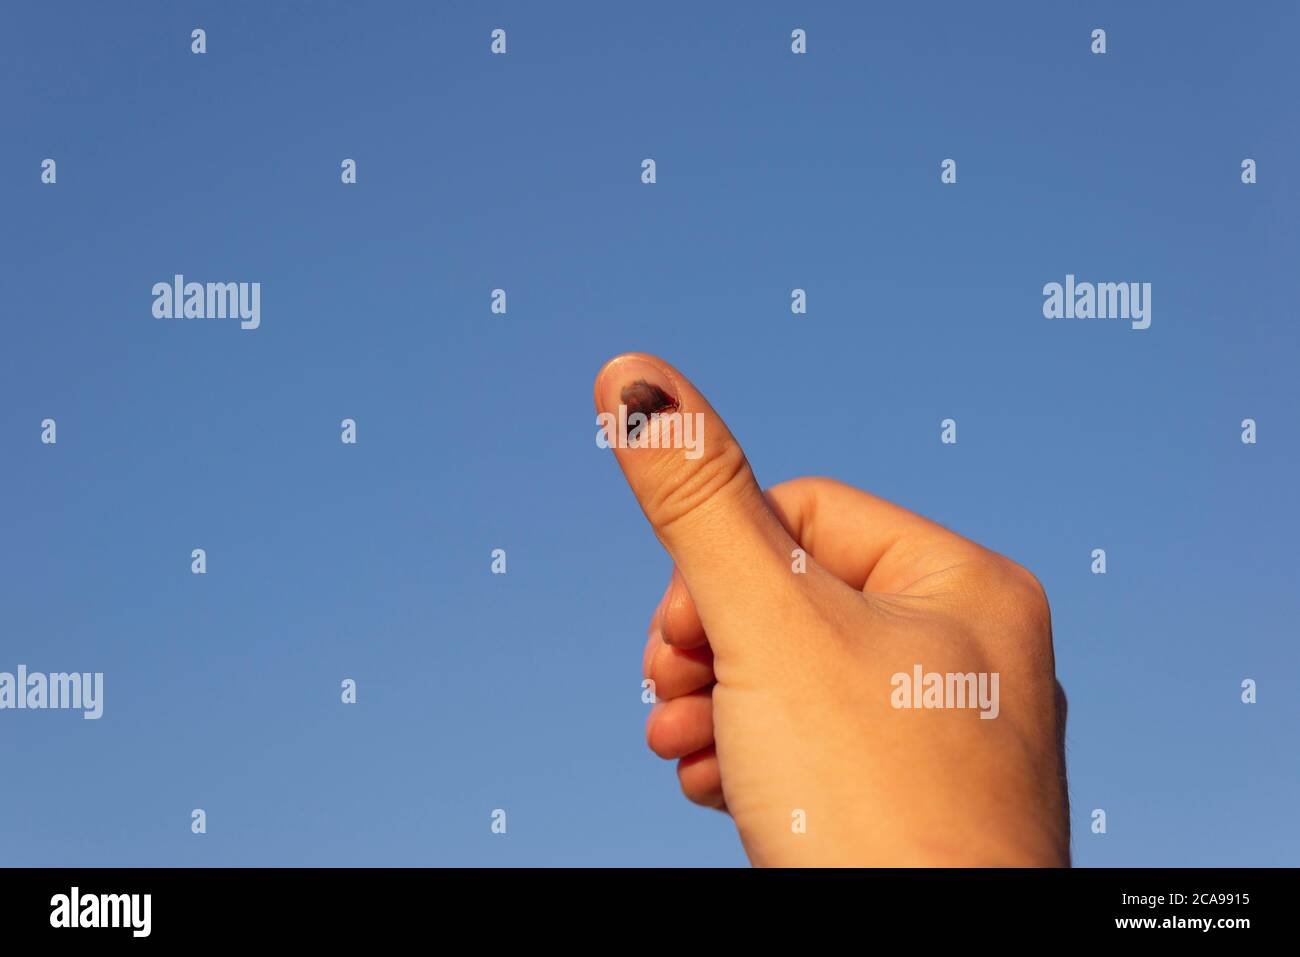 Bruised Fingernail High Resolution Stock Photography and Images - Alamy